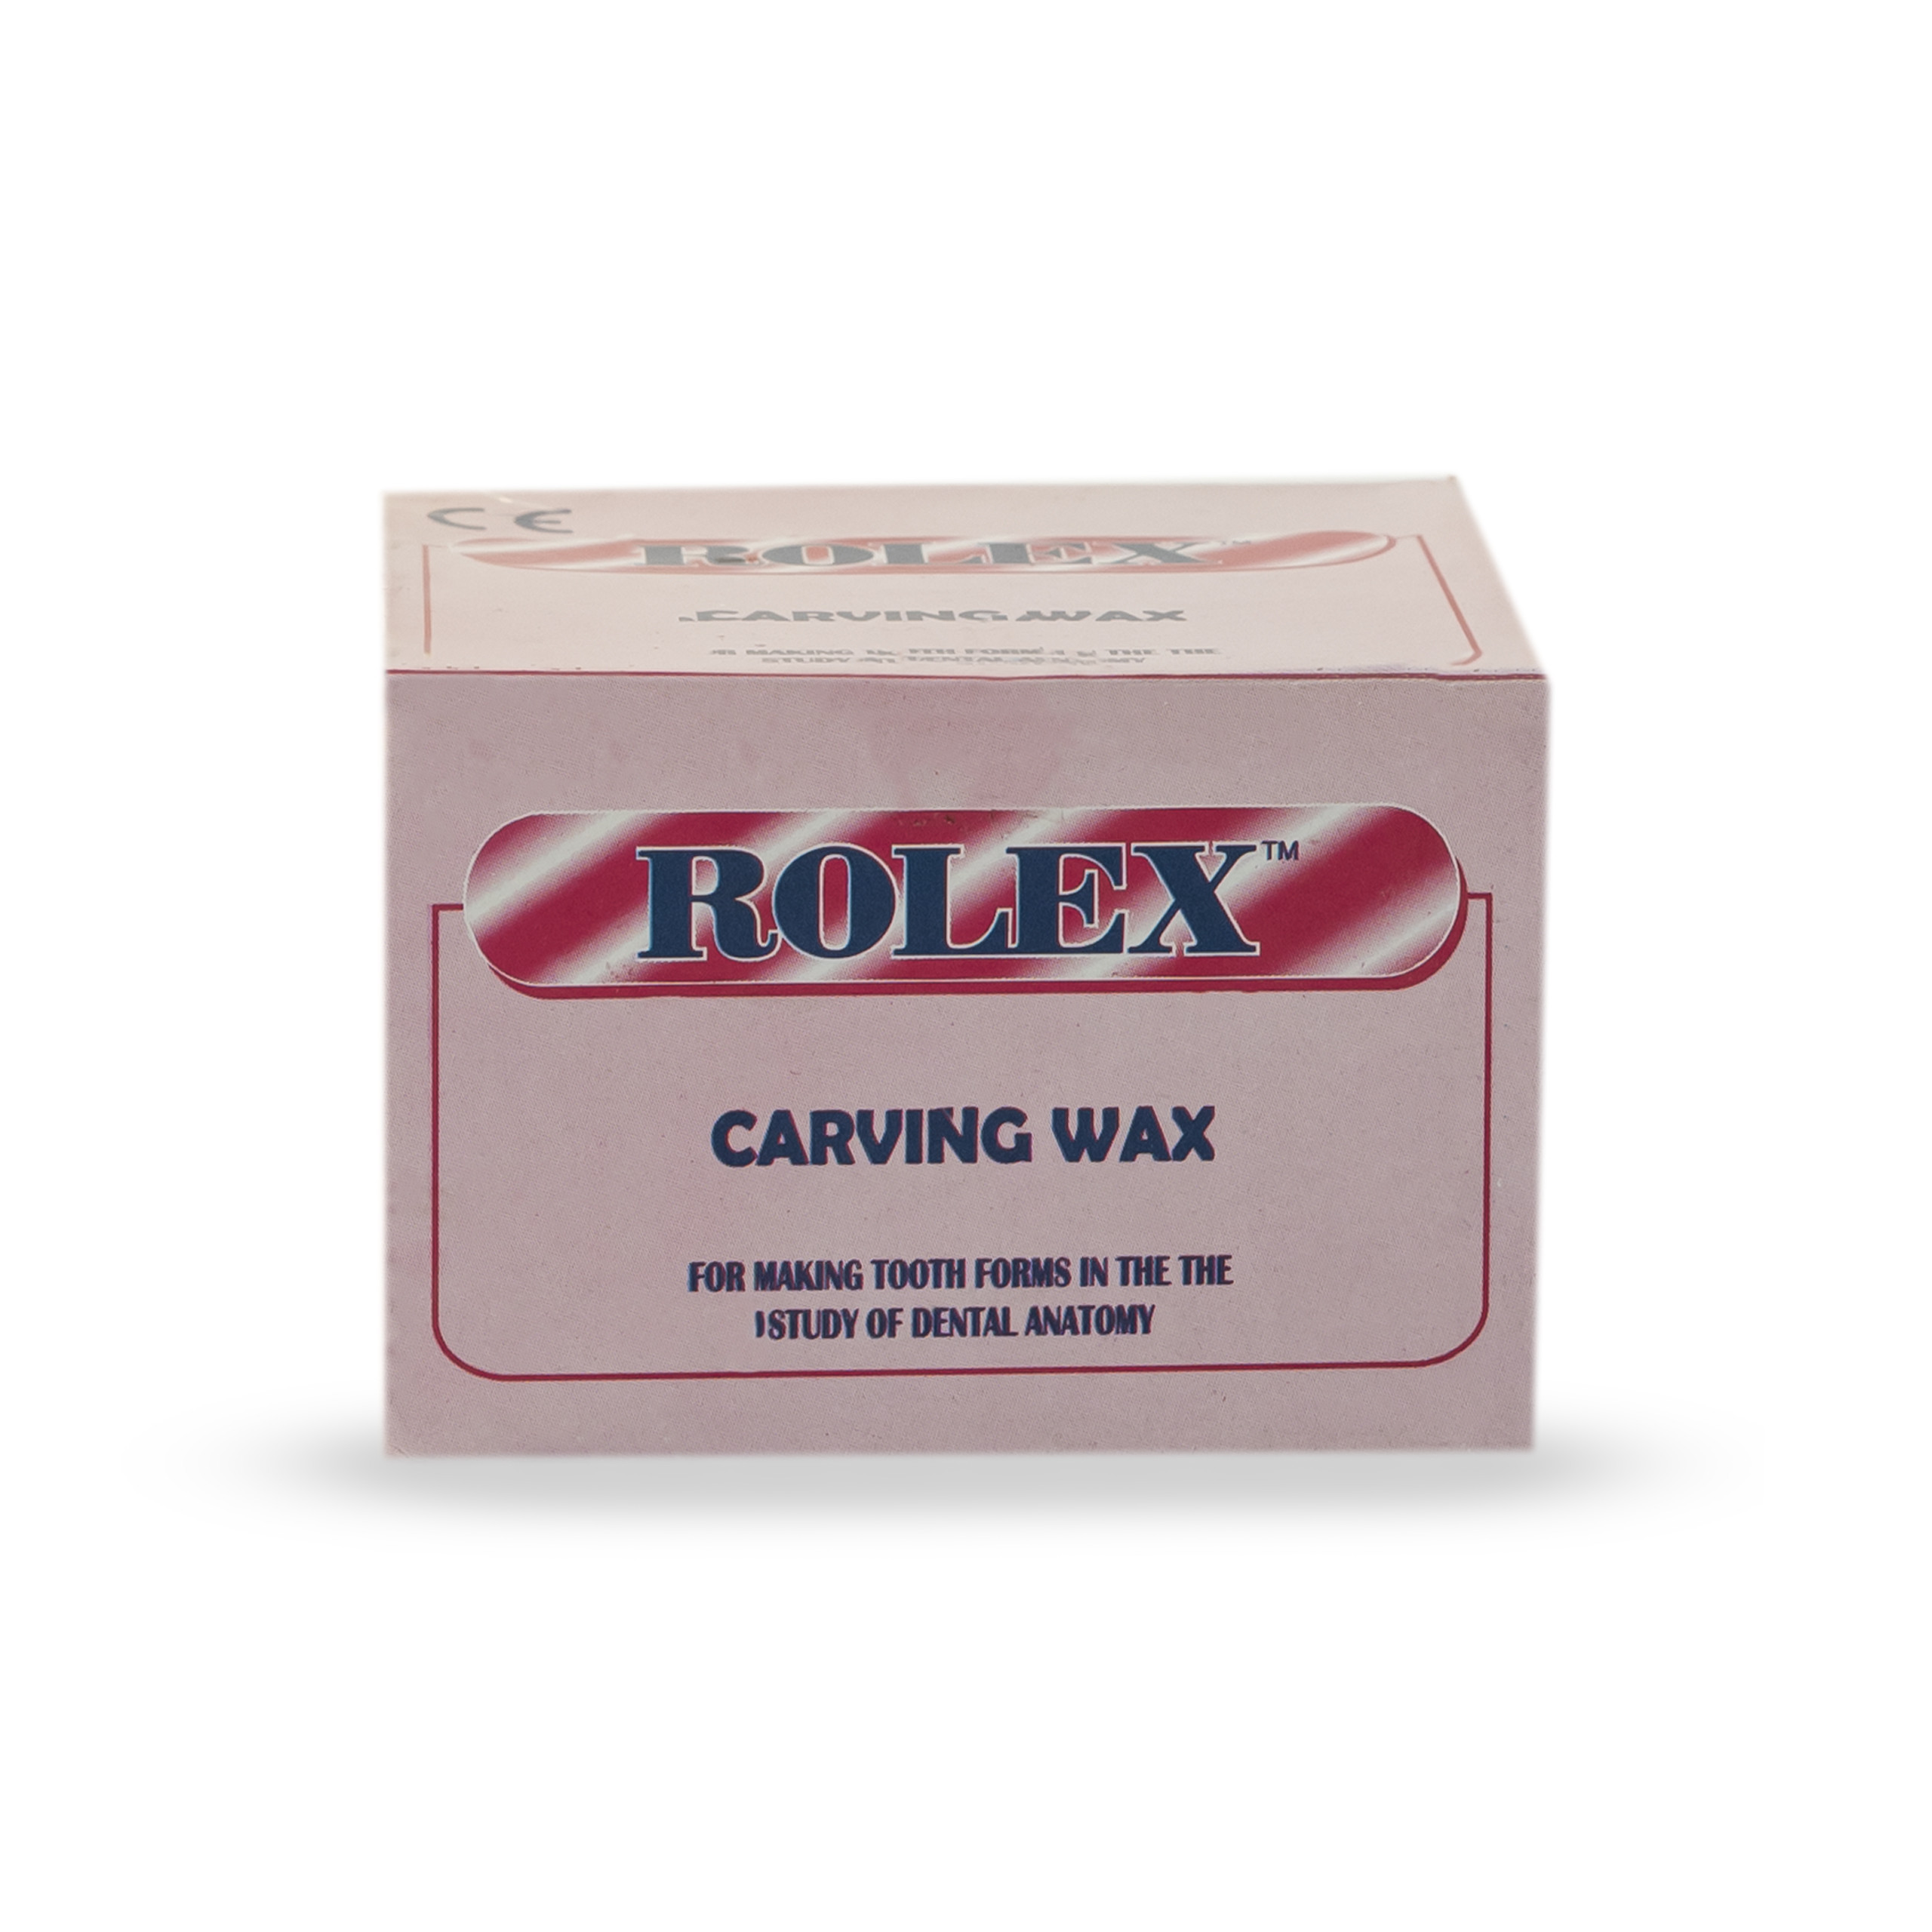 Rolex Carving Wax